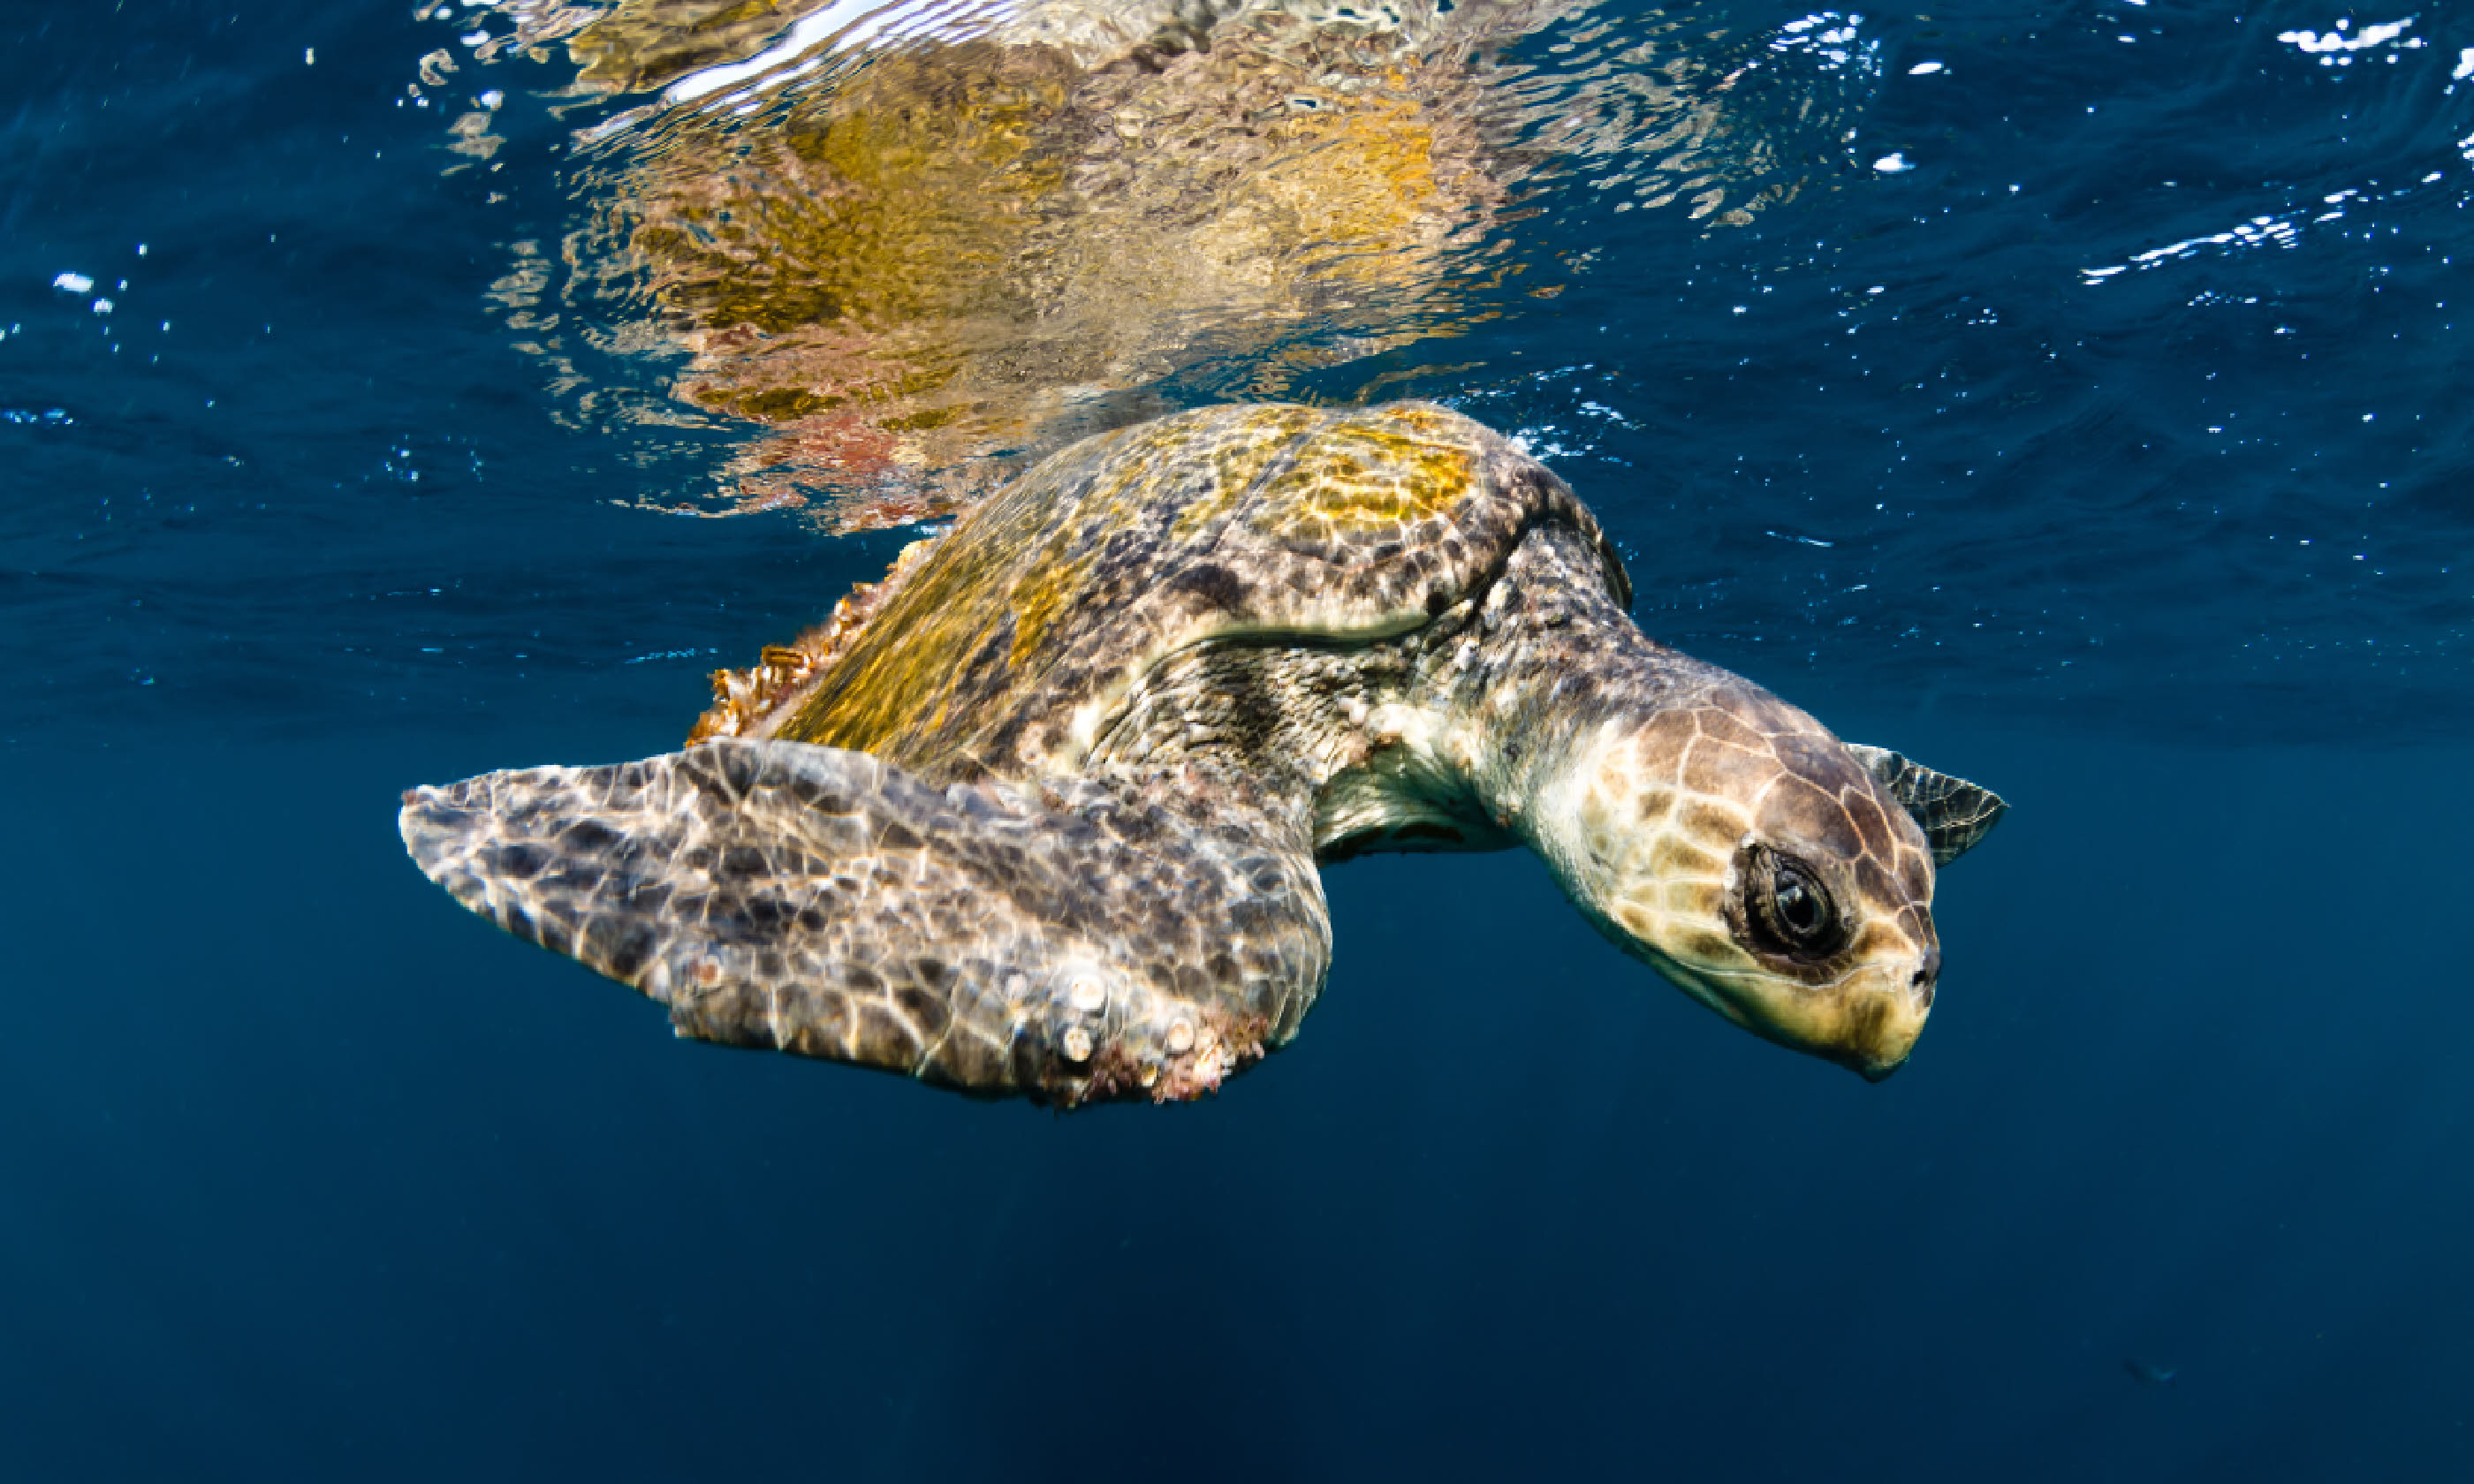 Olive ridley turtle swimming (Shutterstock)